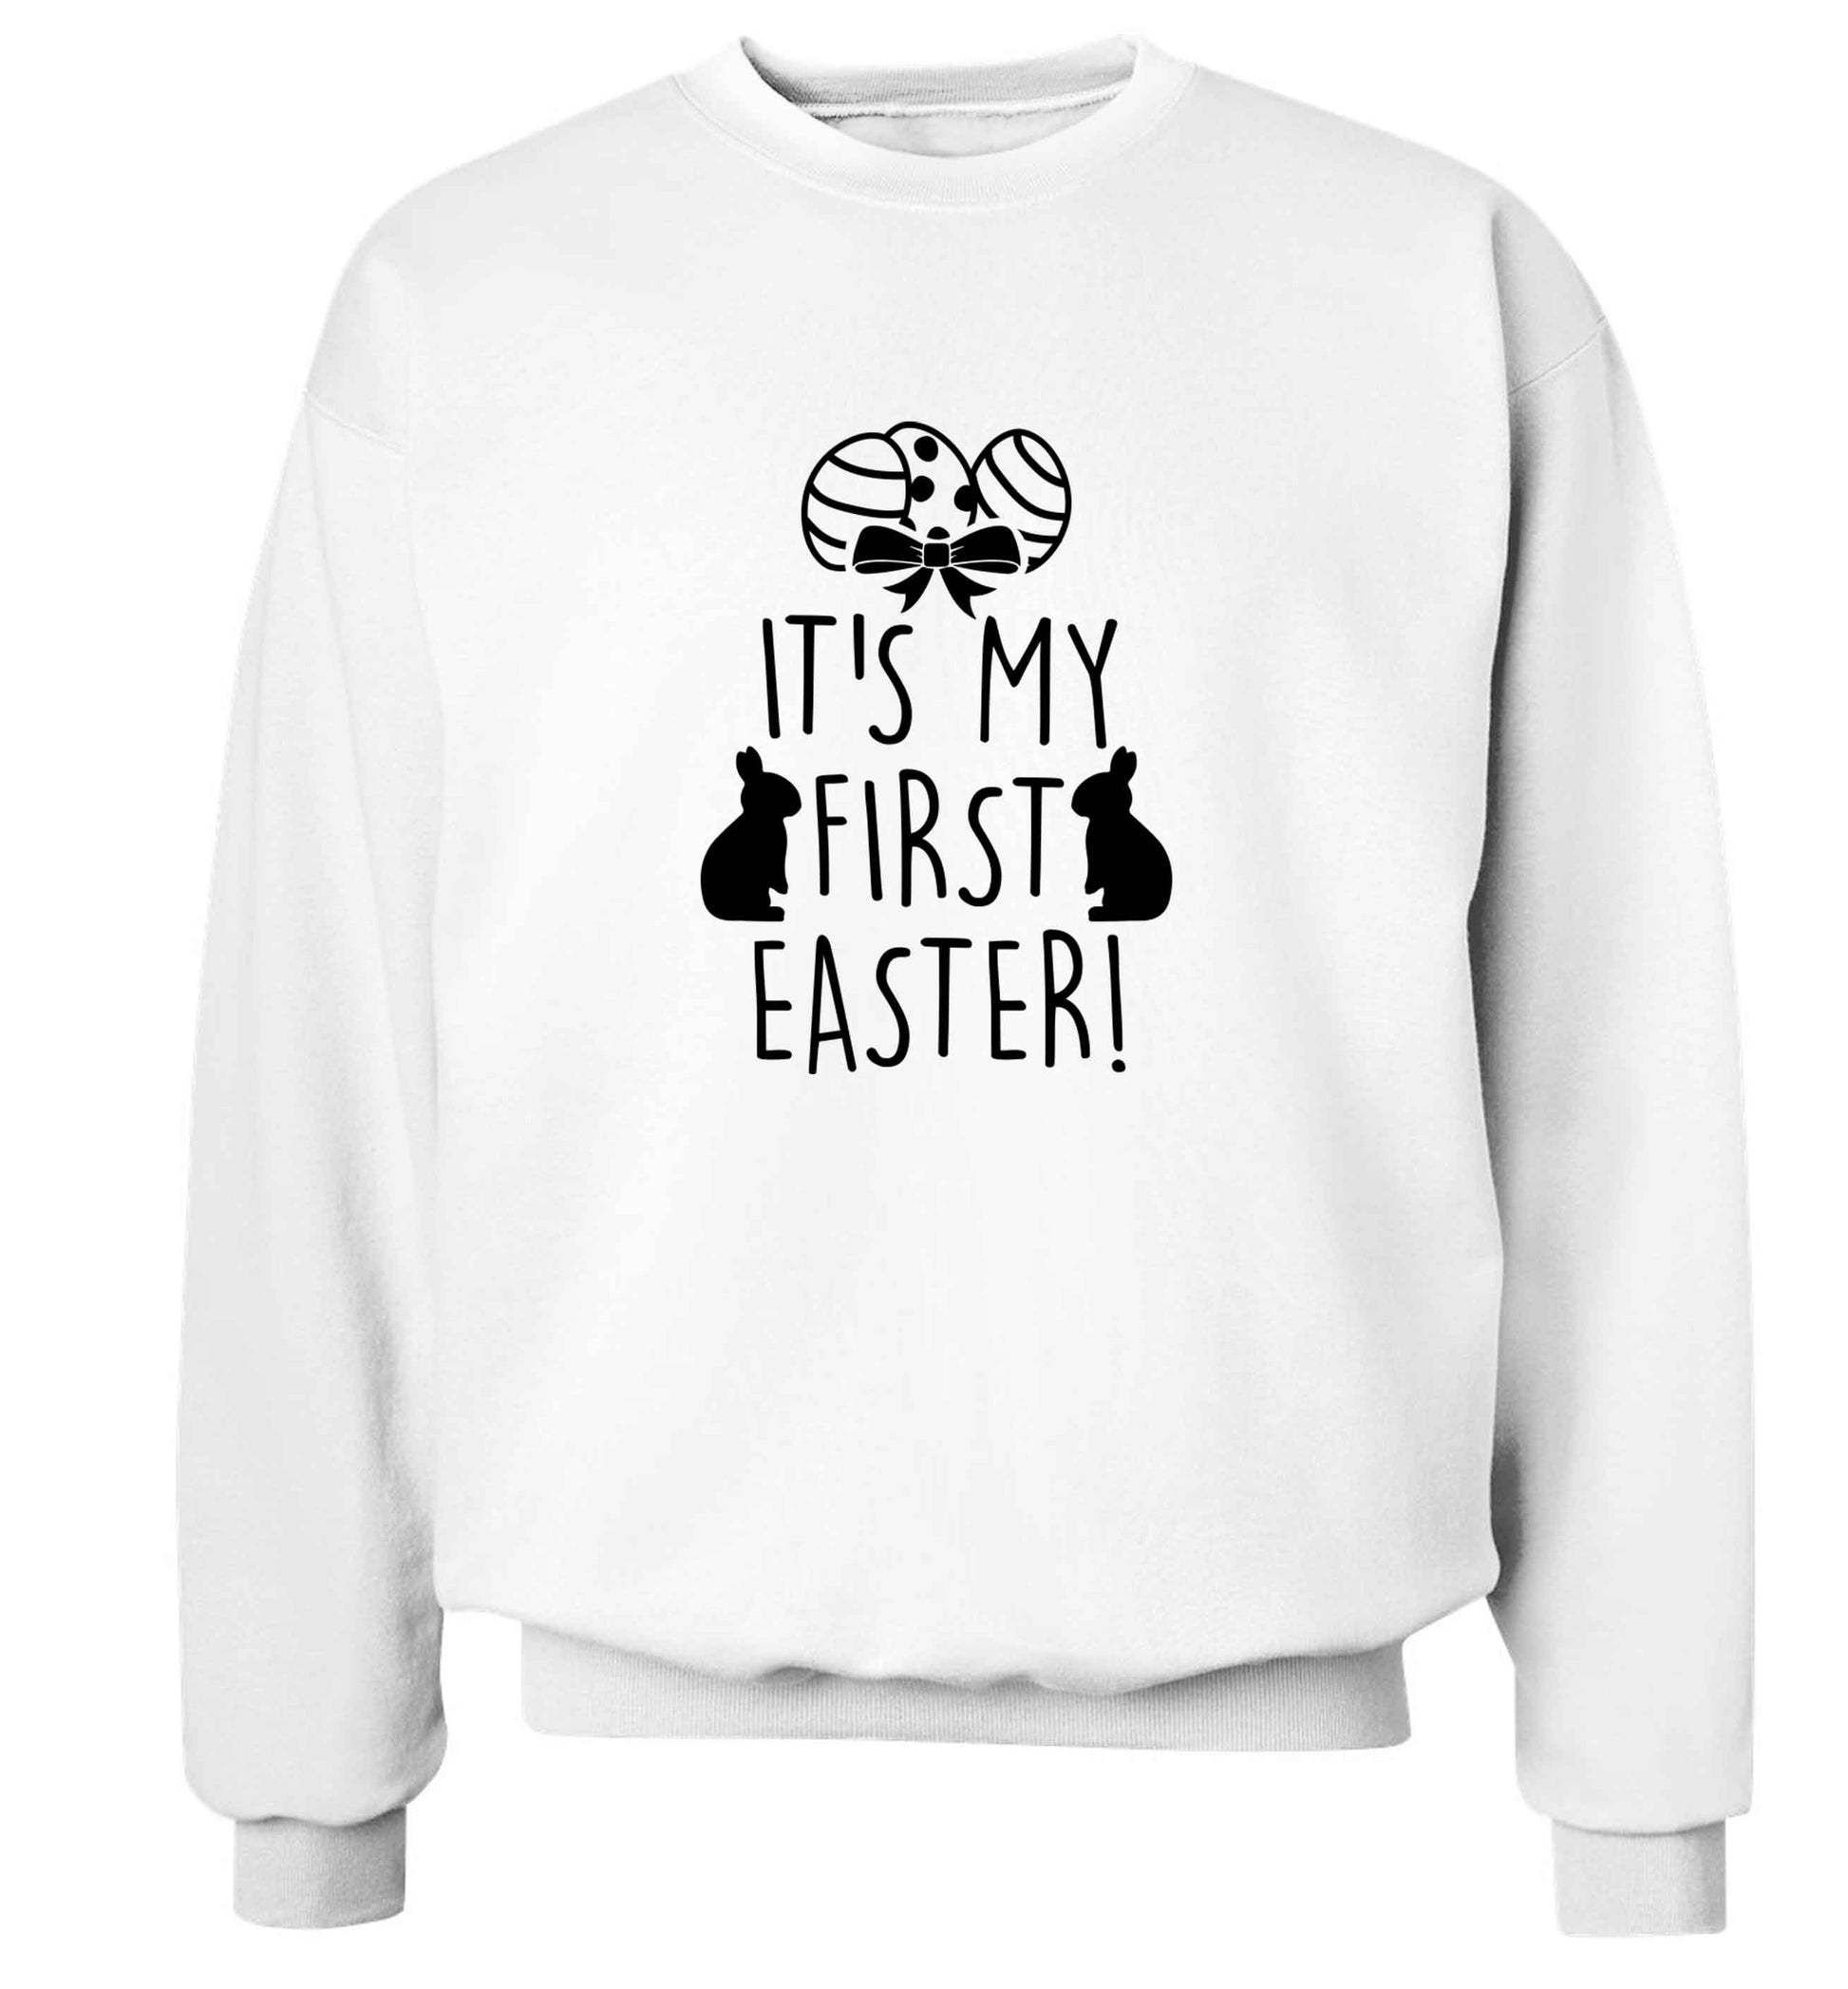 It's my first Easter adult's unisex white sweater 2XL